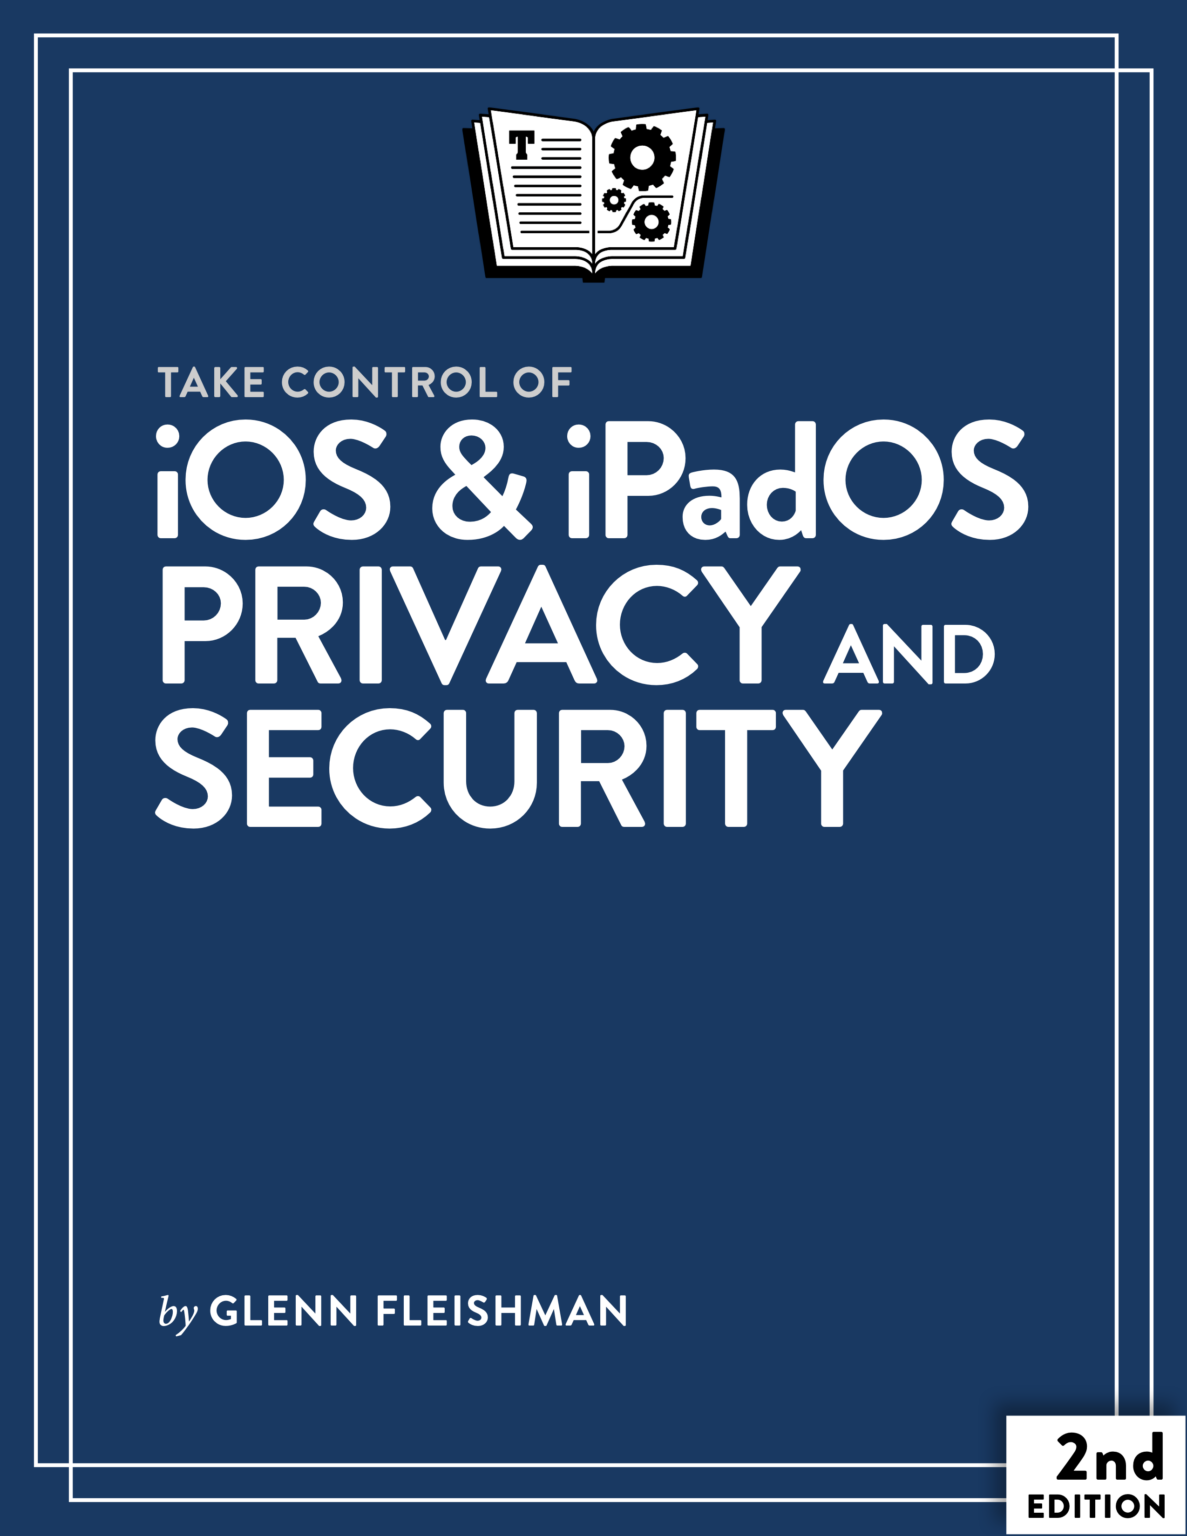 Take-Control-of-iOS-iPadOS-Privacy-and-Security-2.0-cover-1187x1536.png